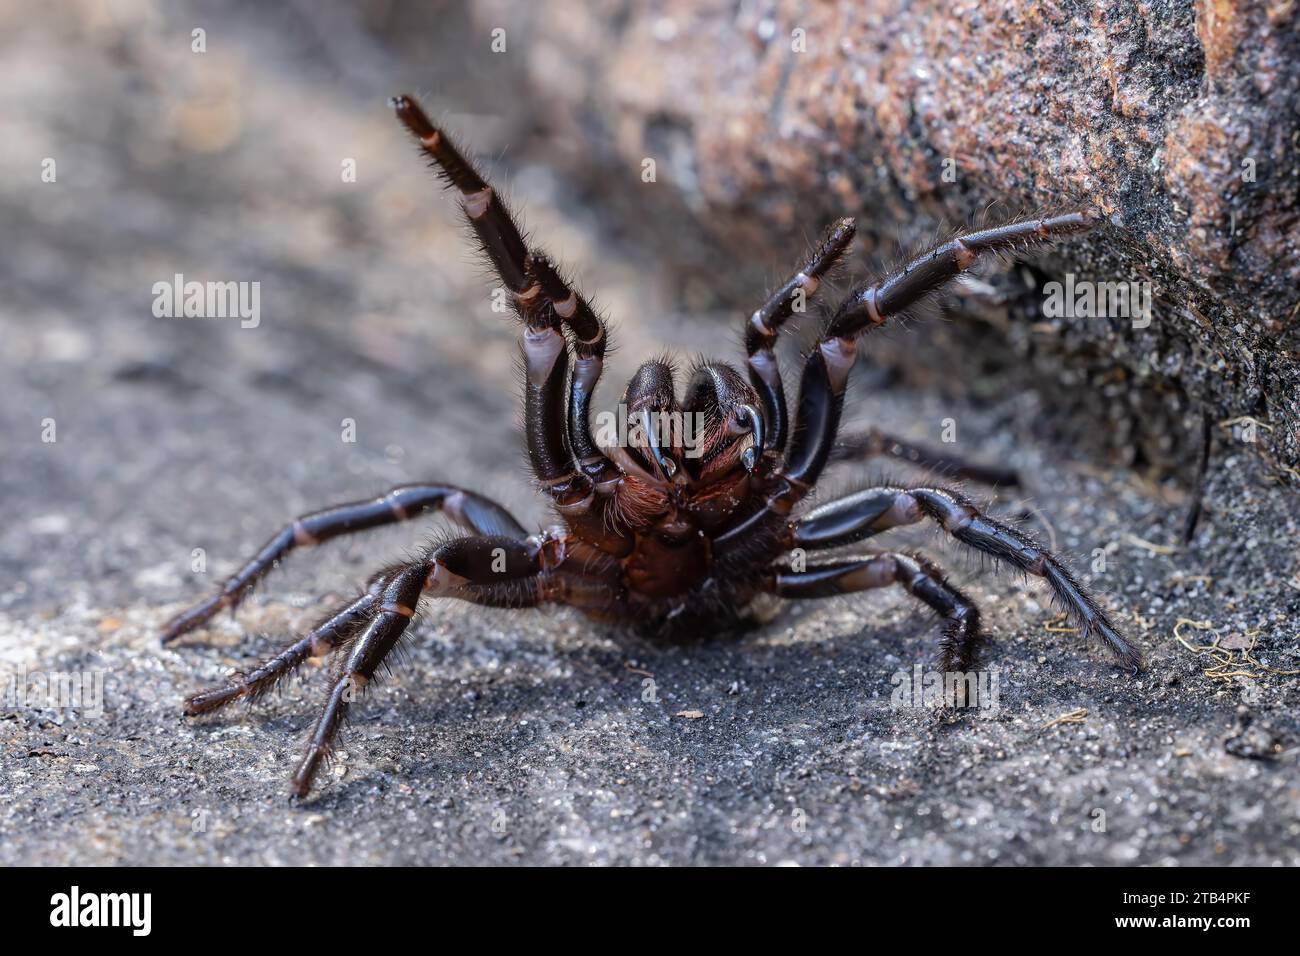 Defensive Female Sydney Funnel Web Spider with venom droplets on fangs Stock Photo